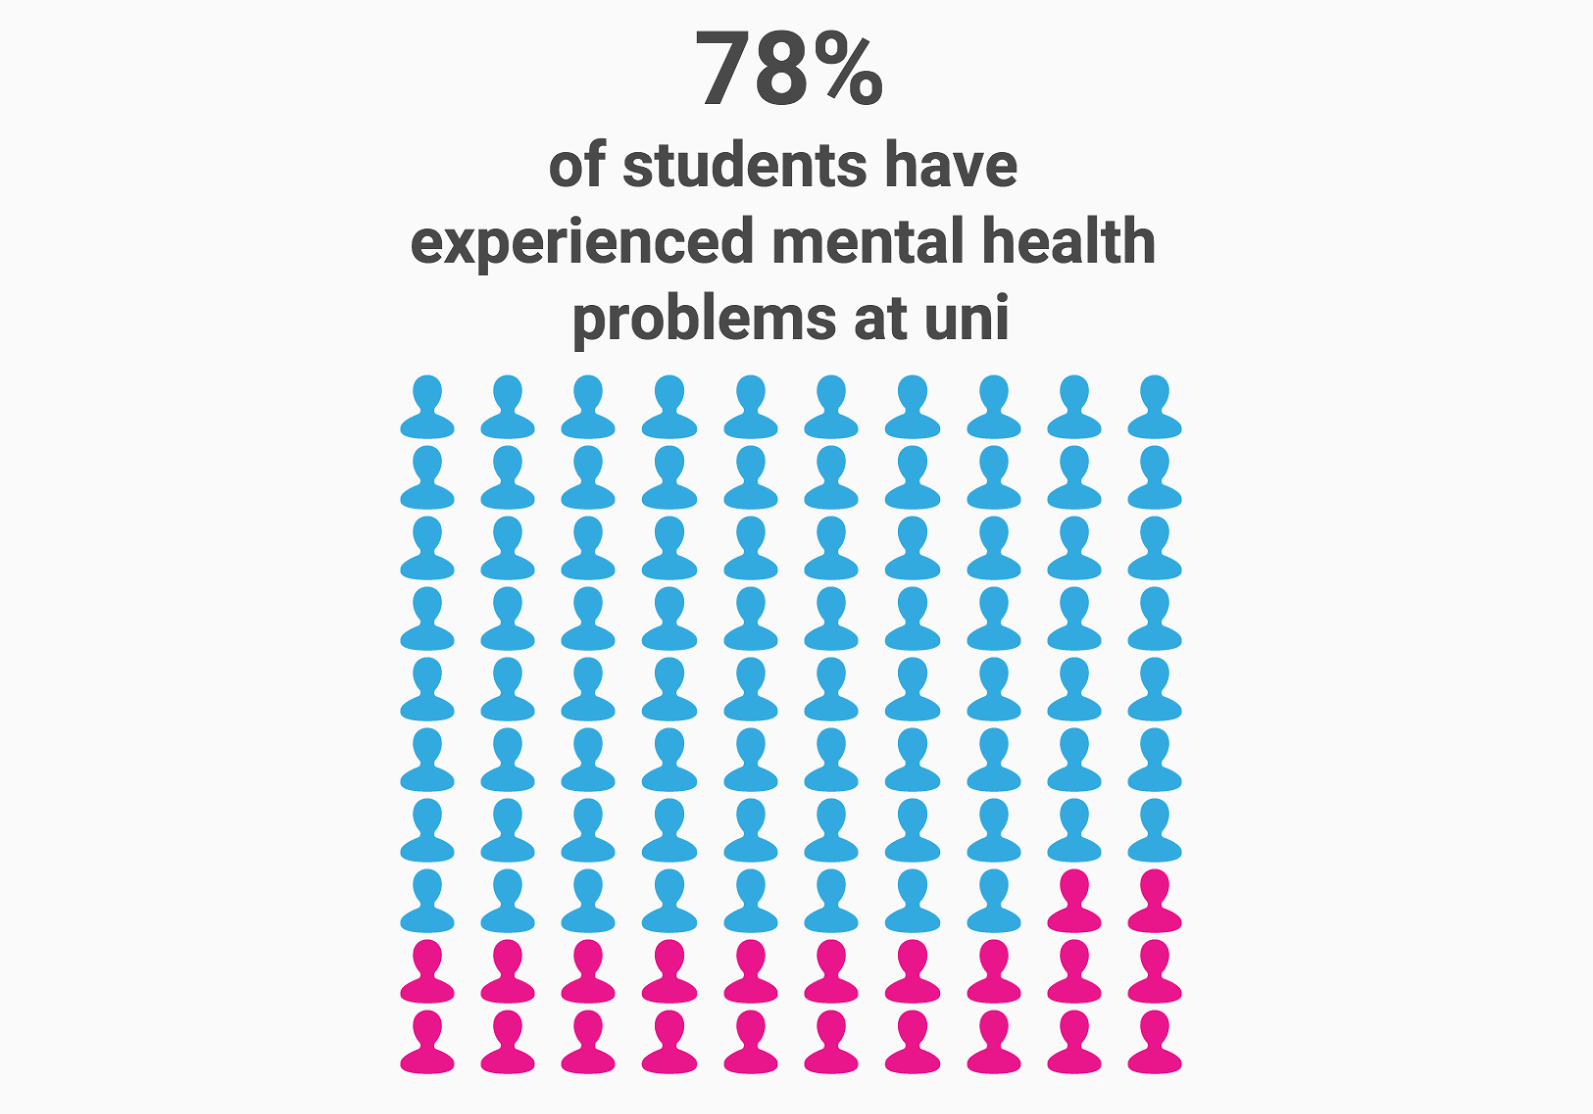 Infographic. 78% of students have experienced mental health problems at uni. Blue and pink people shapes showing this percentage visually